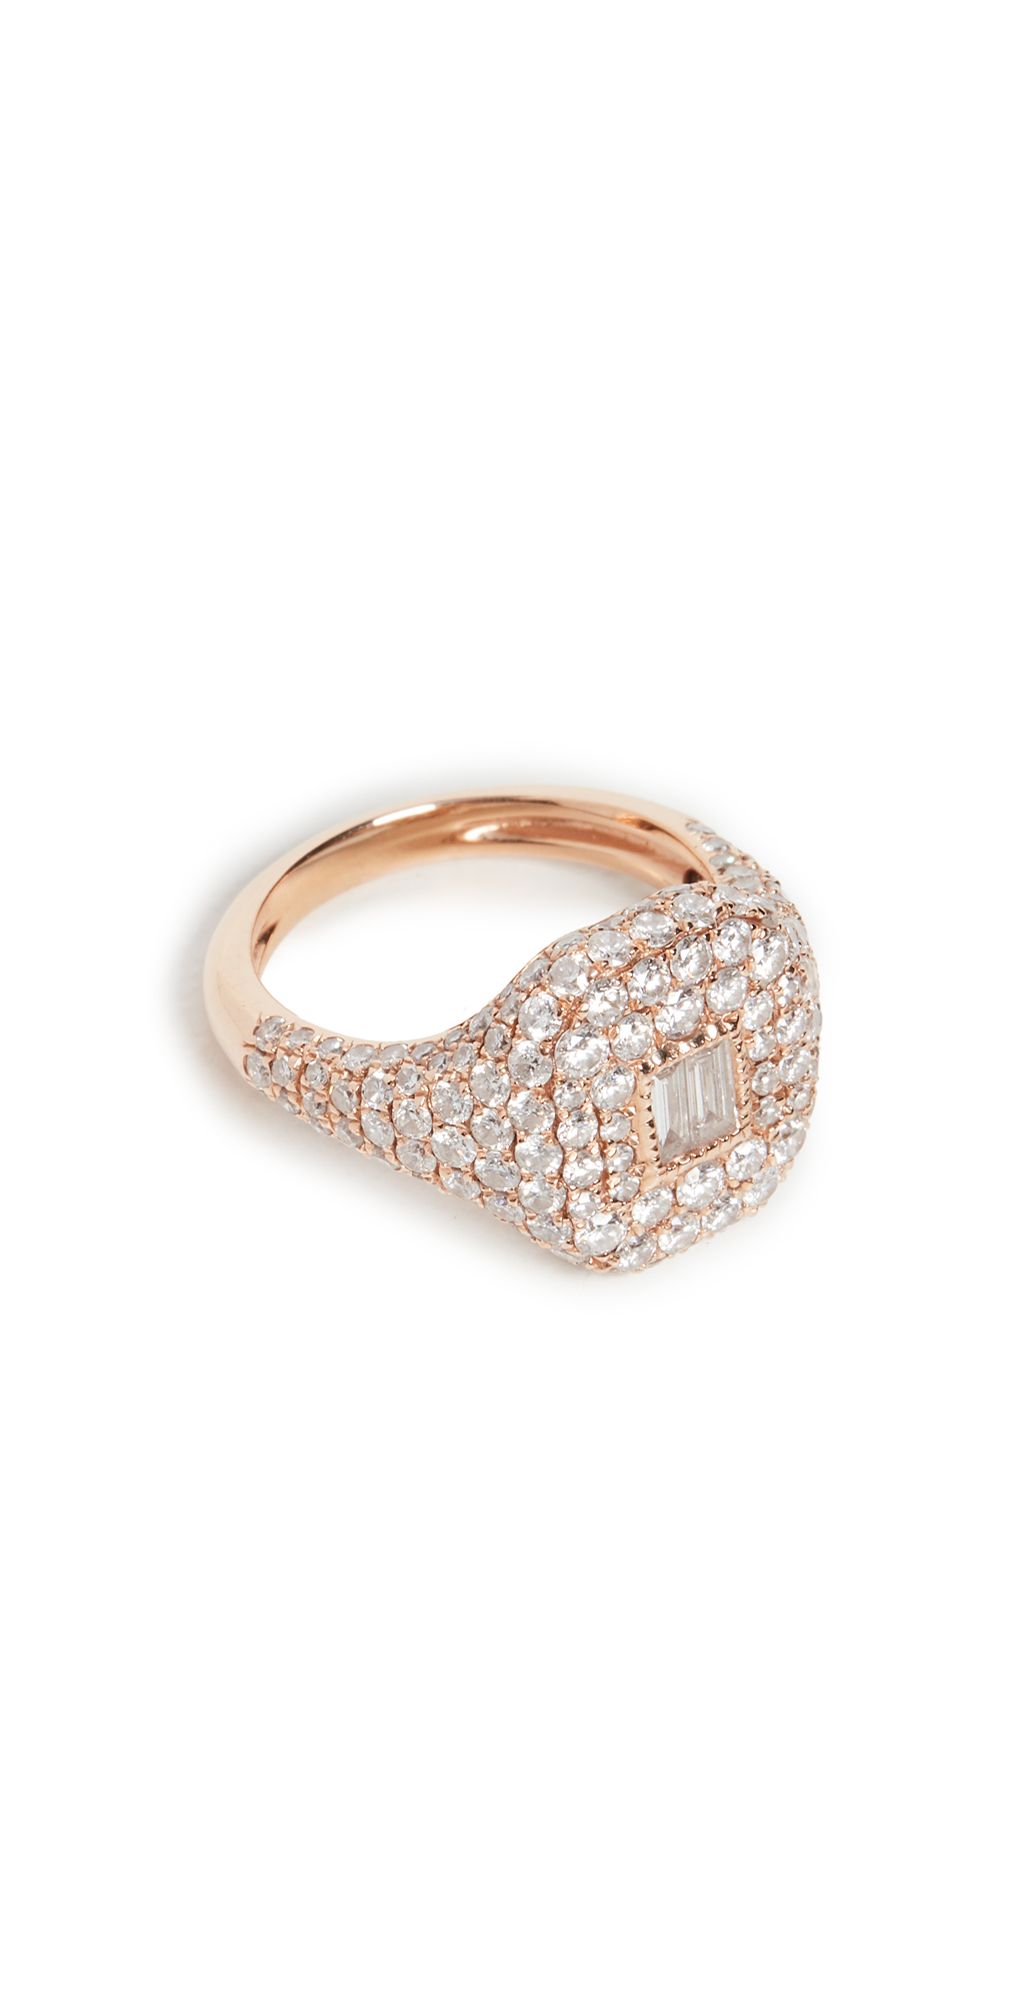 SHAY 18k Essential Pave Pinky Ring | Shopbop